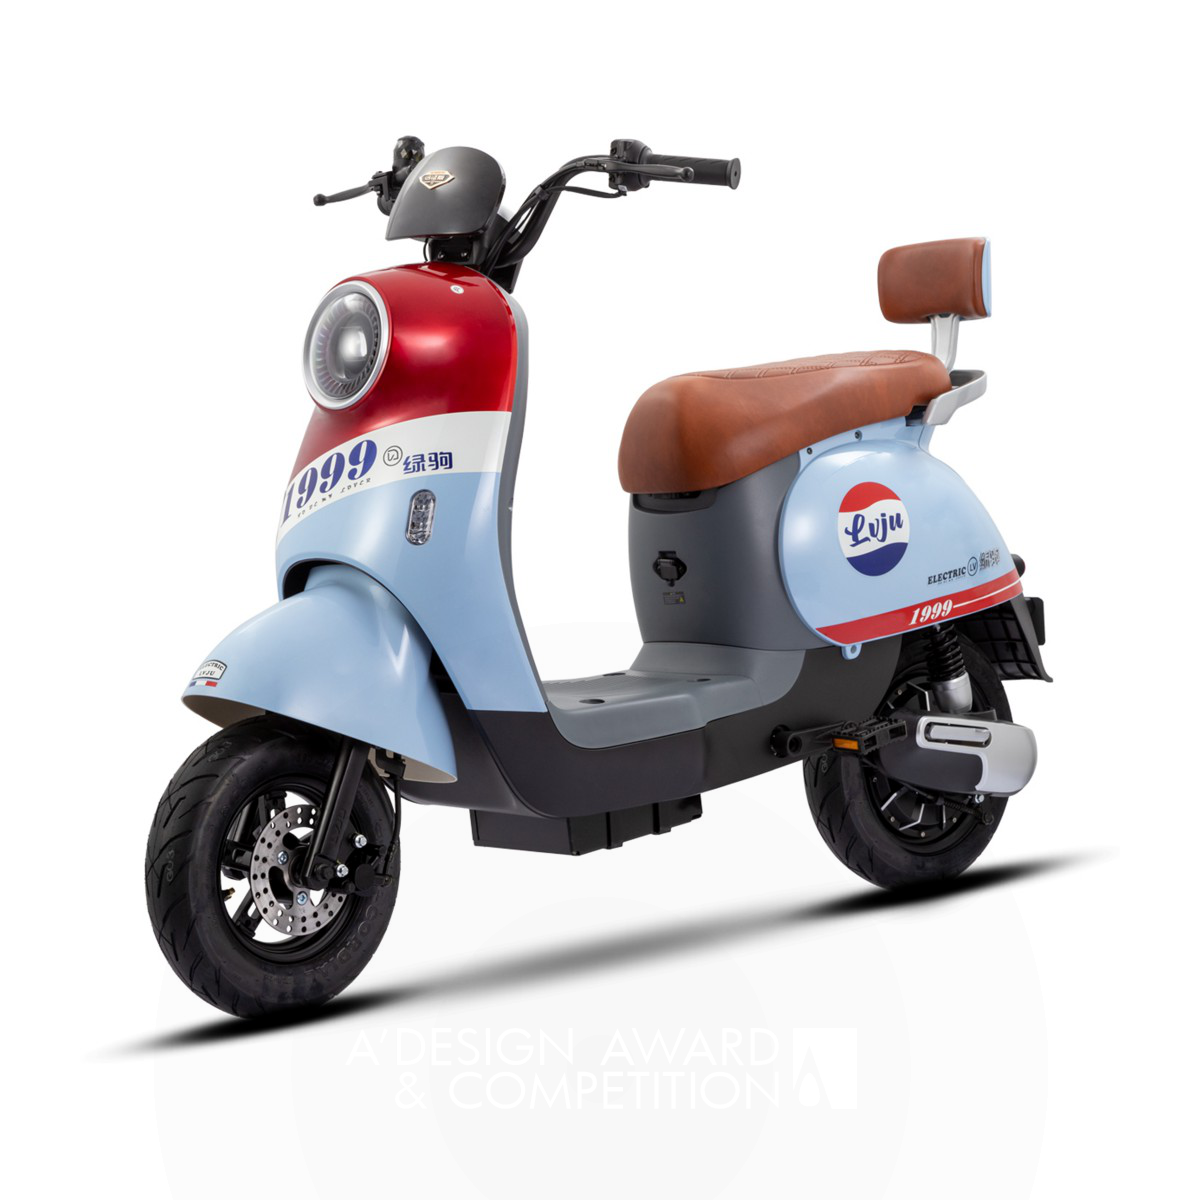 Bozhe Qu wins Bronze at the prestigious A' Scooter Design Award with Luna Electric Scooter.